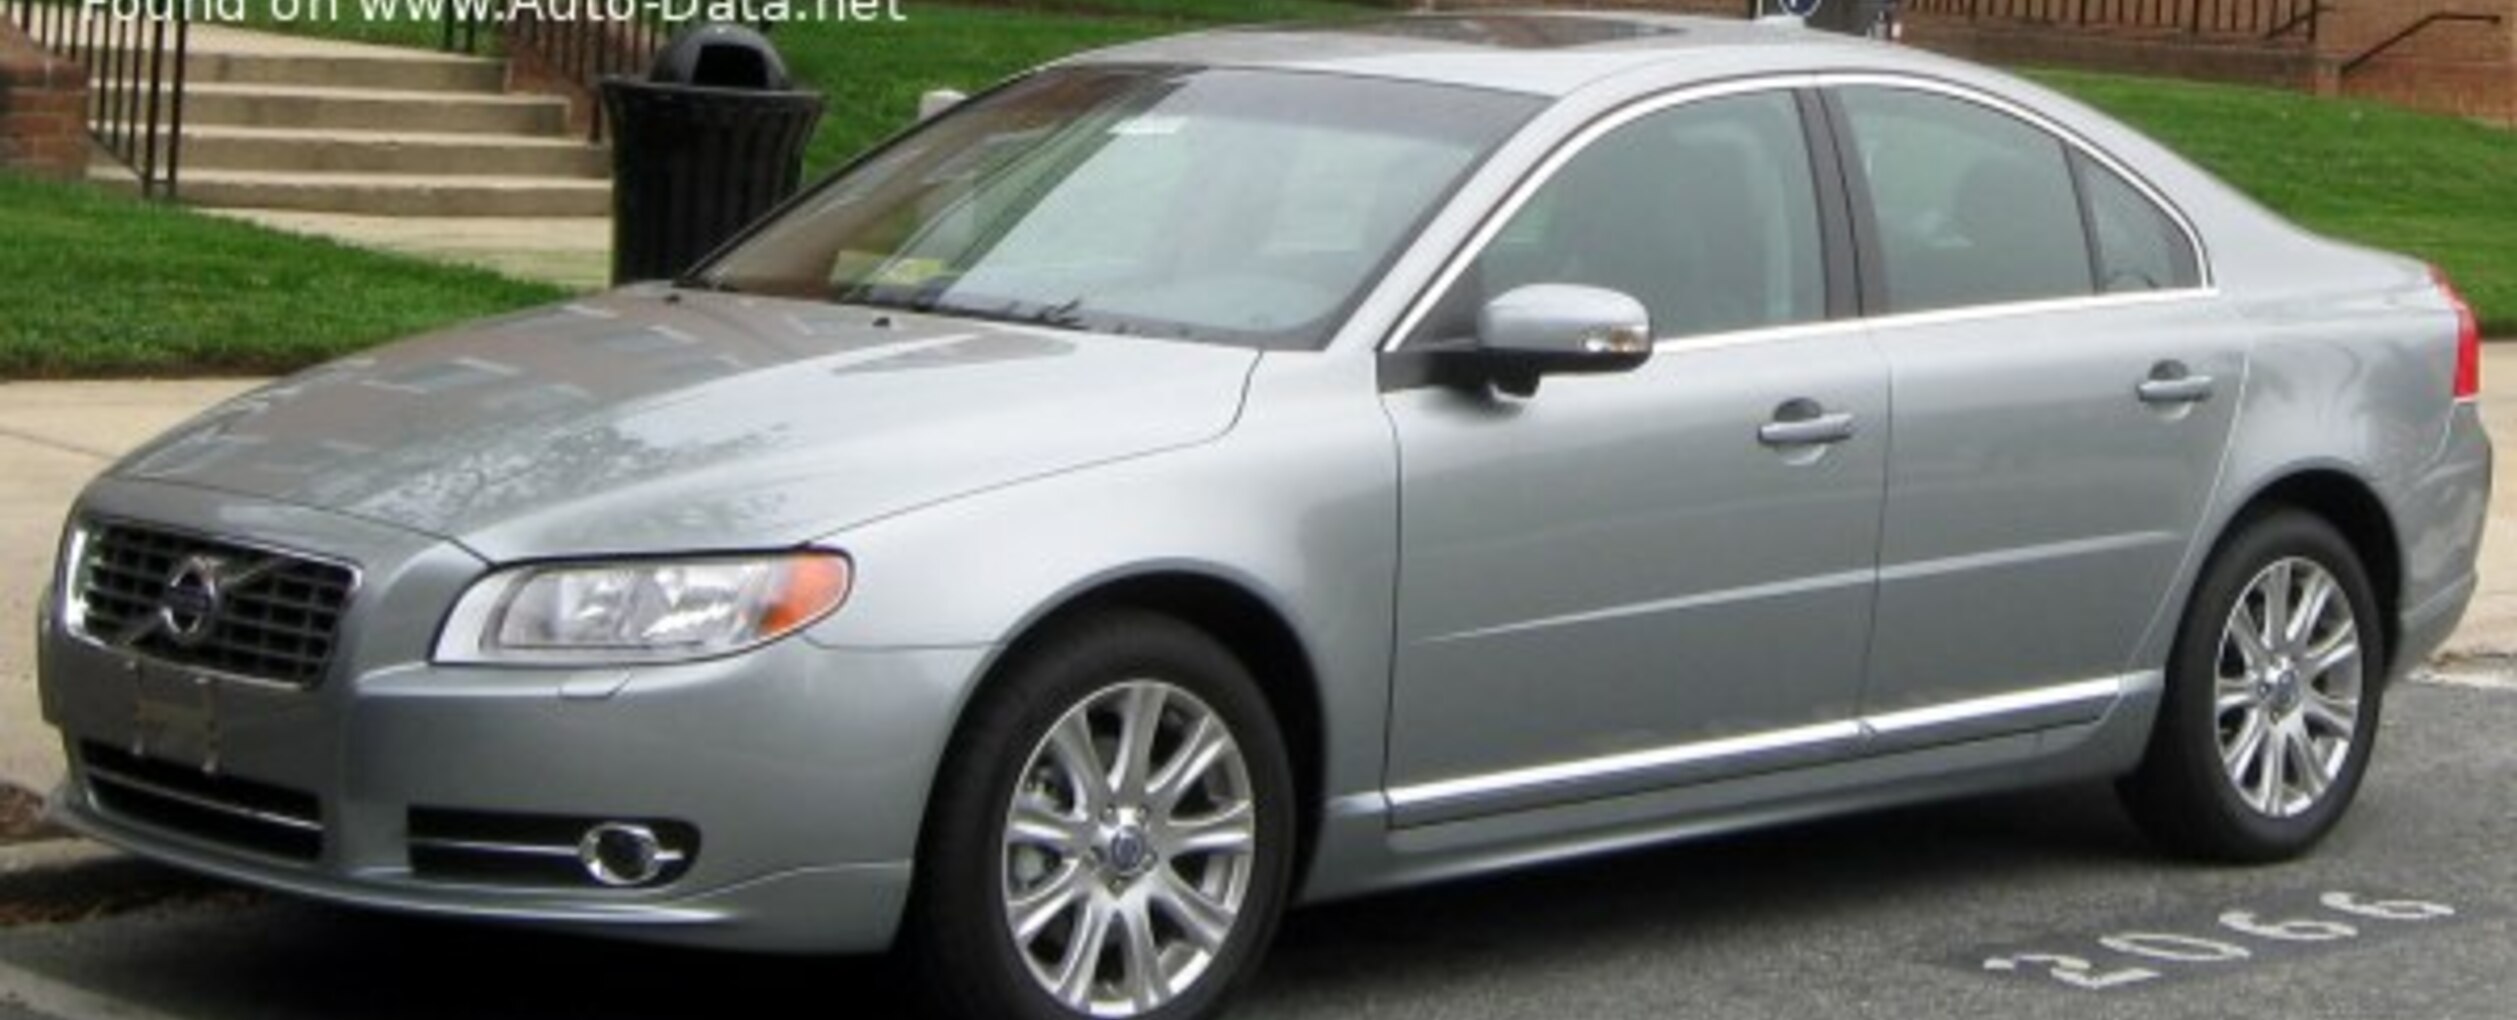 Volvo S80 II (facelift 2009) 2.4 D5 (205 Hp) AWD Automatic 2009, 2010, 2011 